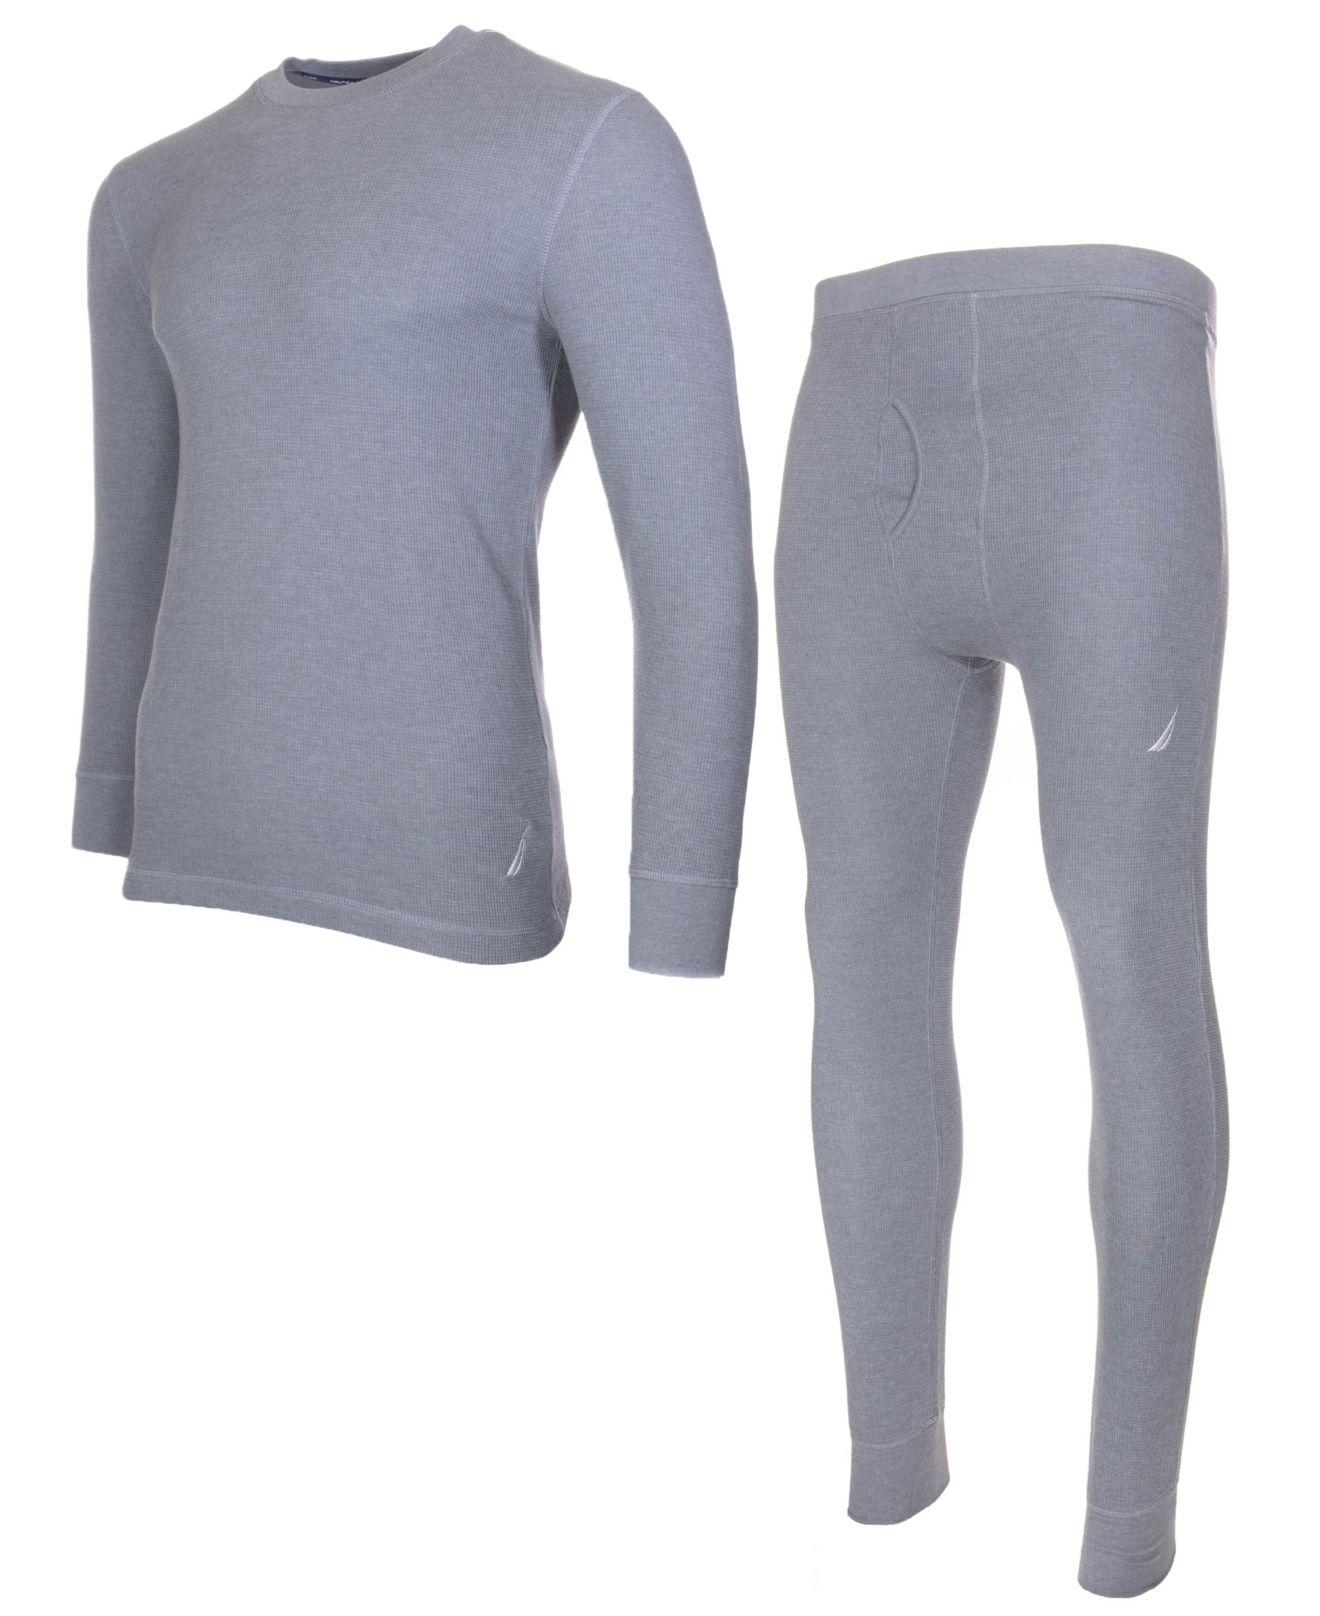 Nautica Cotton 2 Piece Waffle Thermal Sets in Blue for Men - Save 6% - Lyst